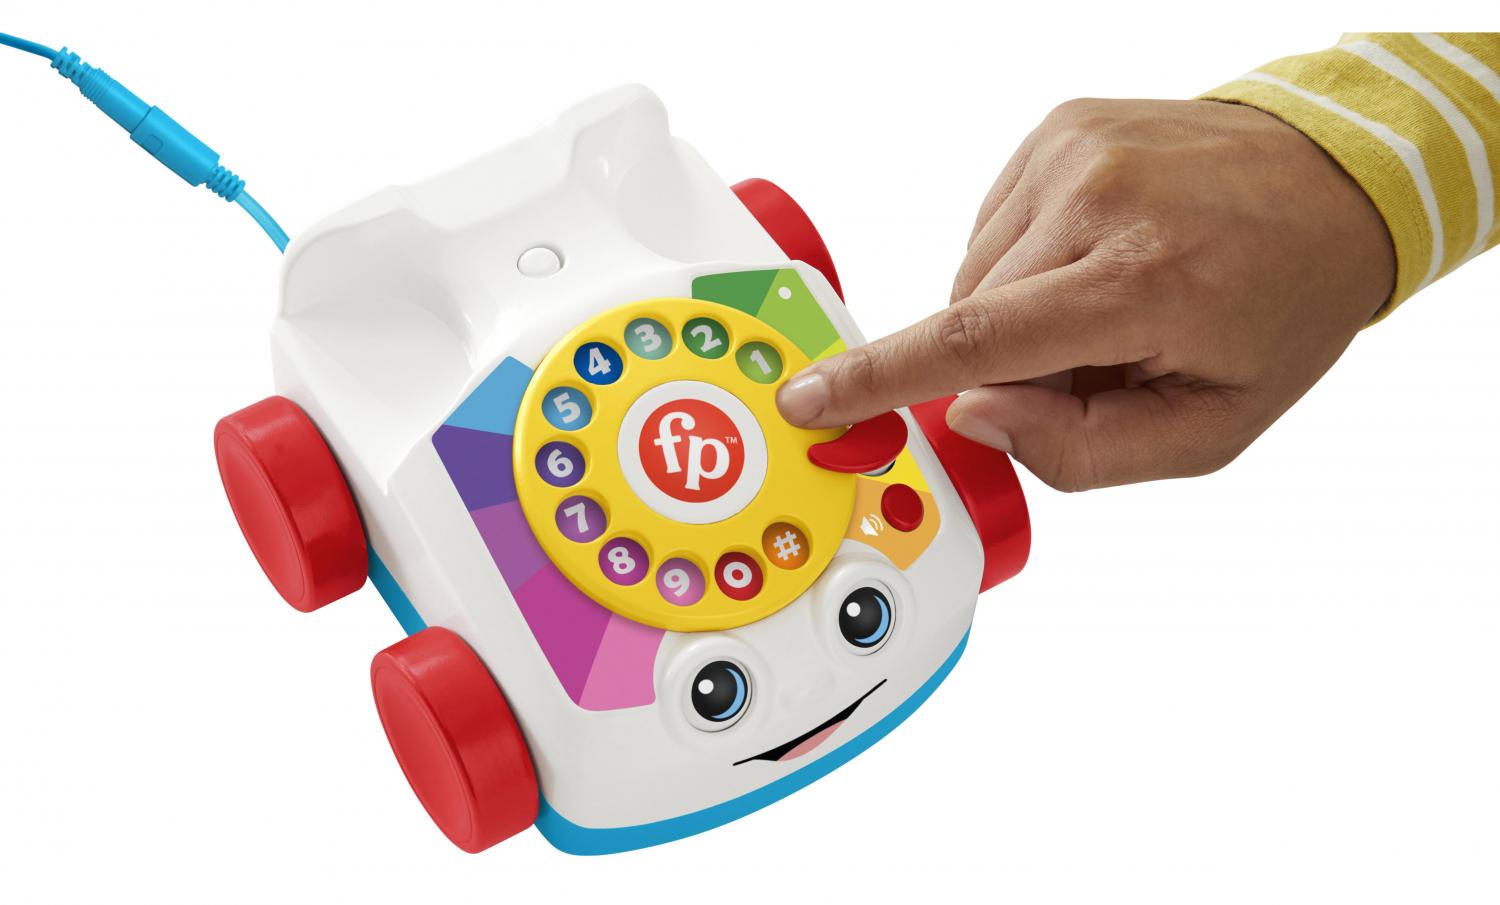 Fisher Price Working Rotary Telephone With Bluetooth - Chatter phone kids toy